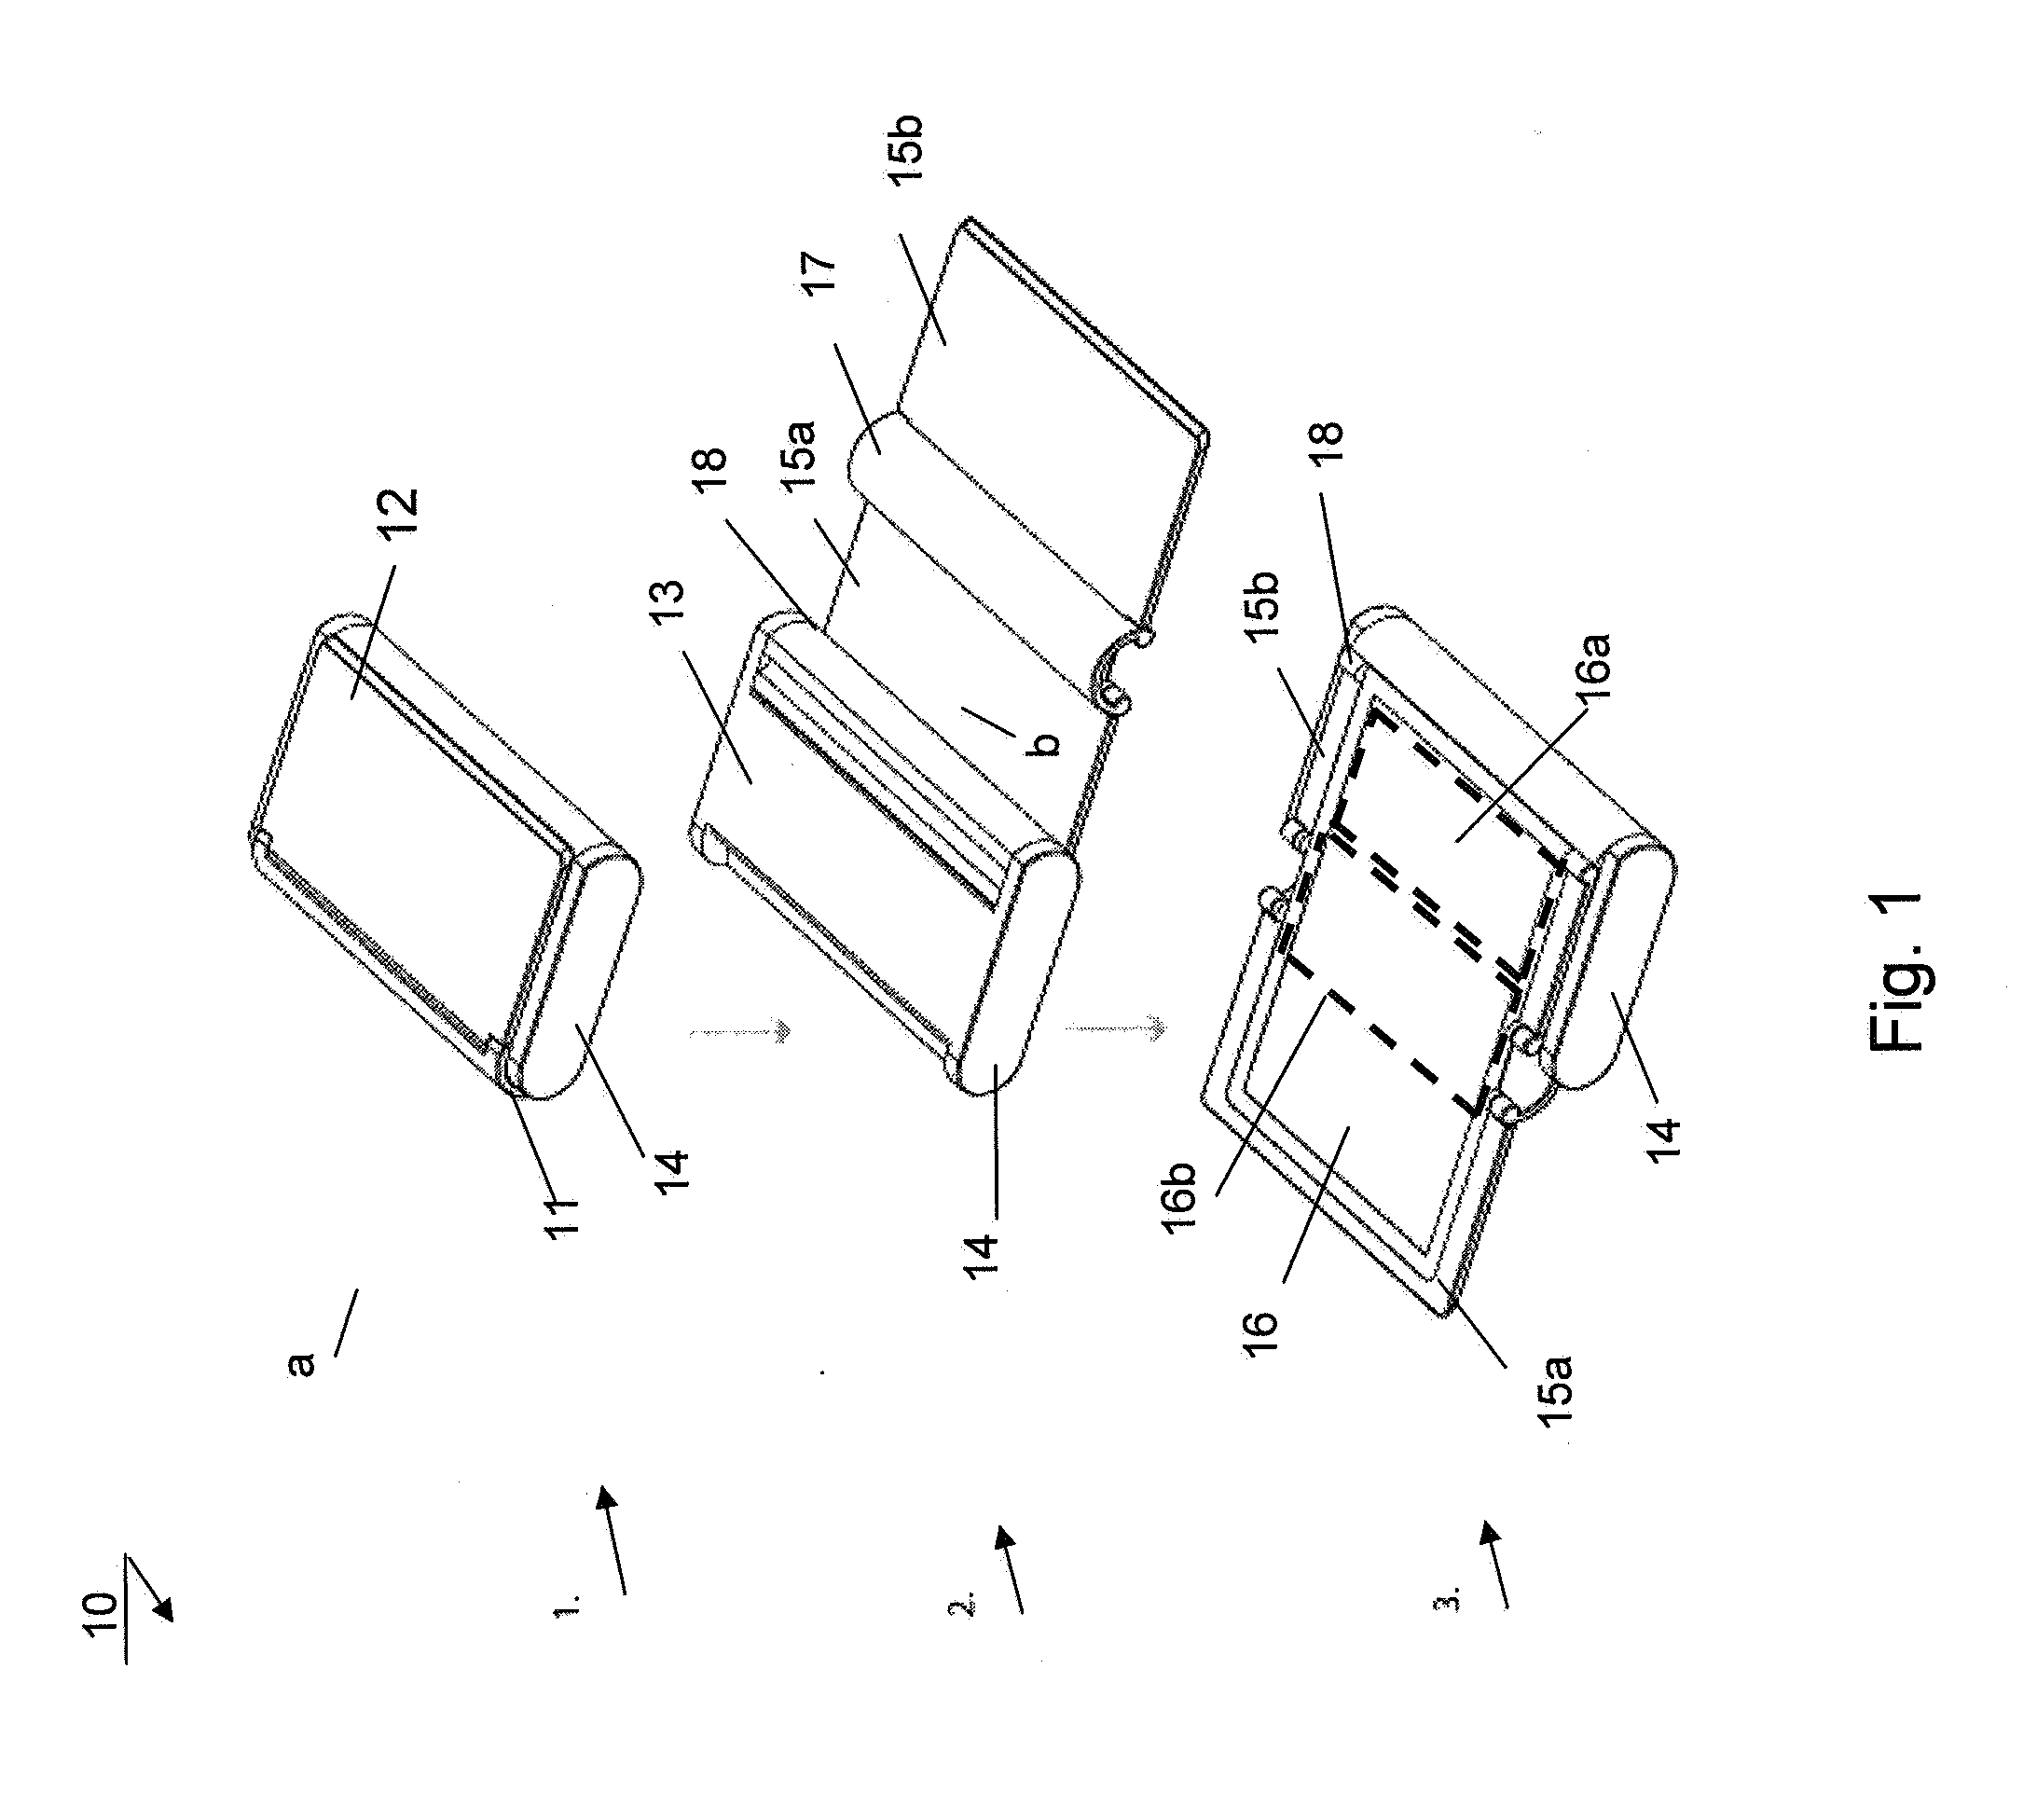 Electronic apparatus with a flexible display having a body enabling further functionality